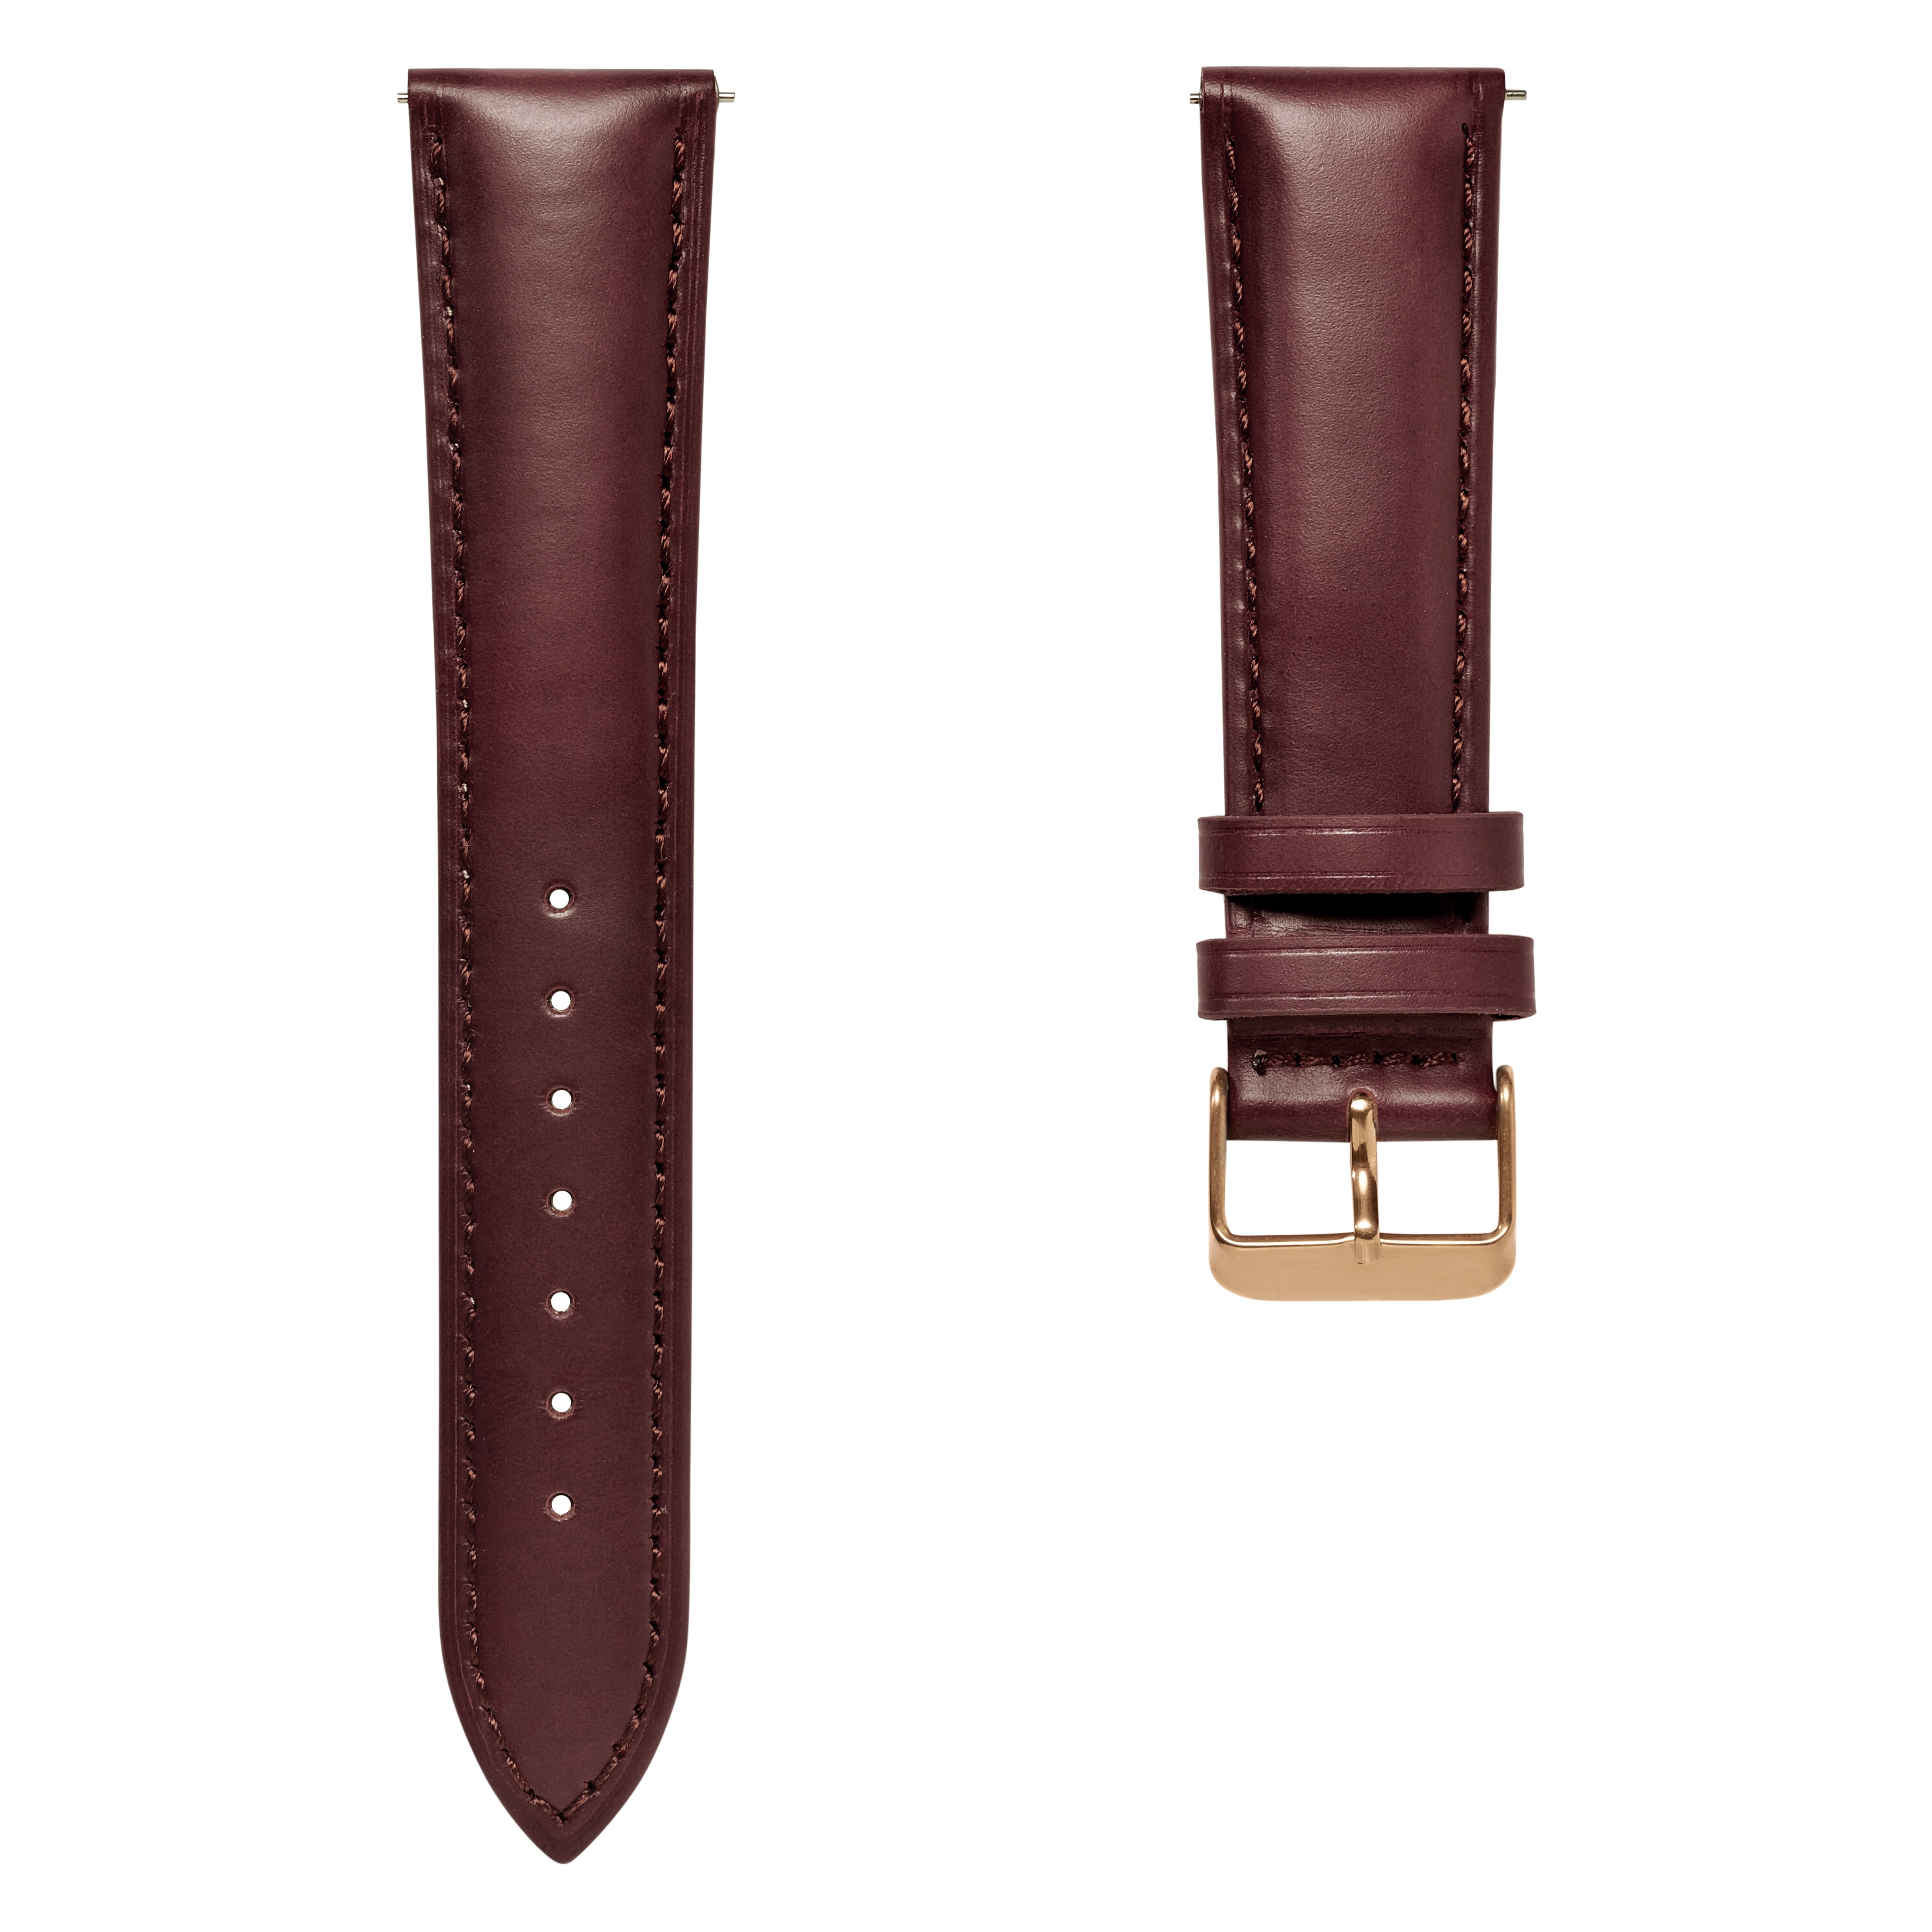 24mm Black Leather Watch Strap with Rose Gold-Tone Buckle – Quick Release, In stock!